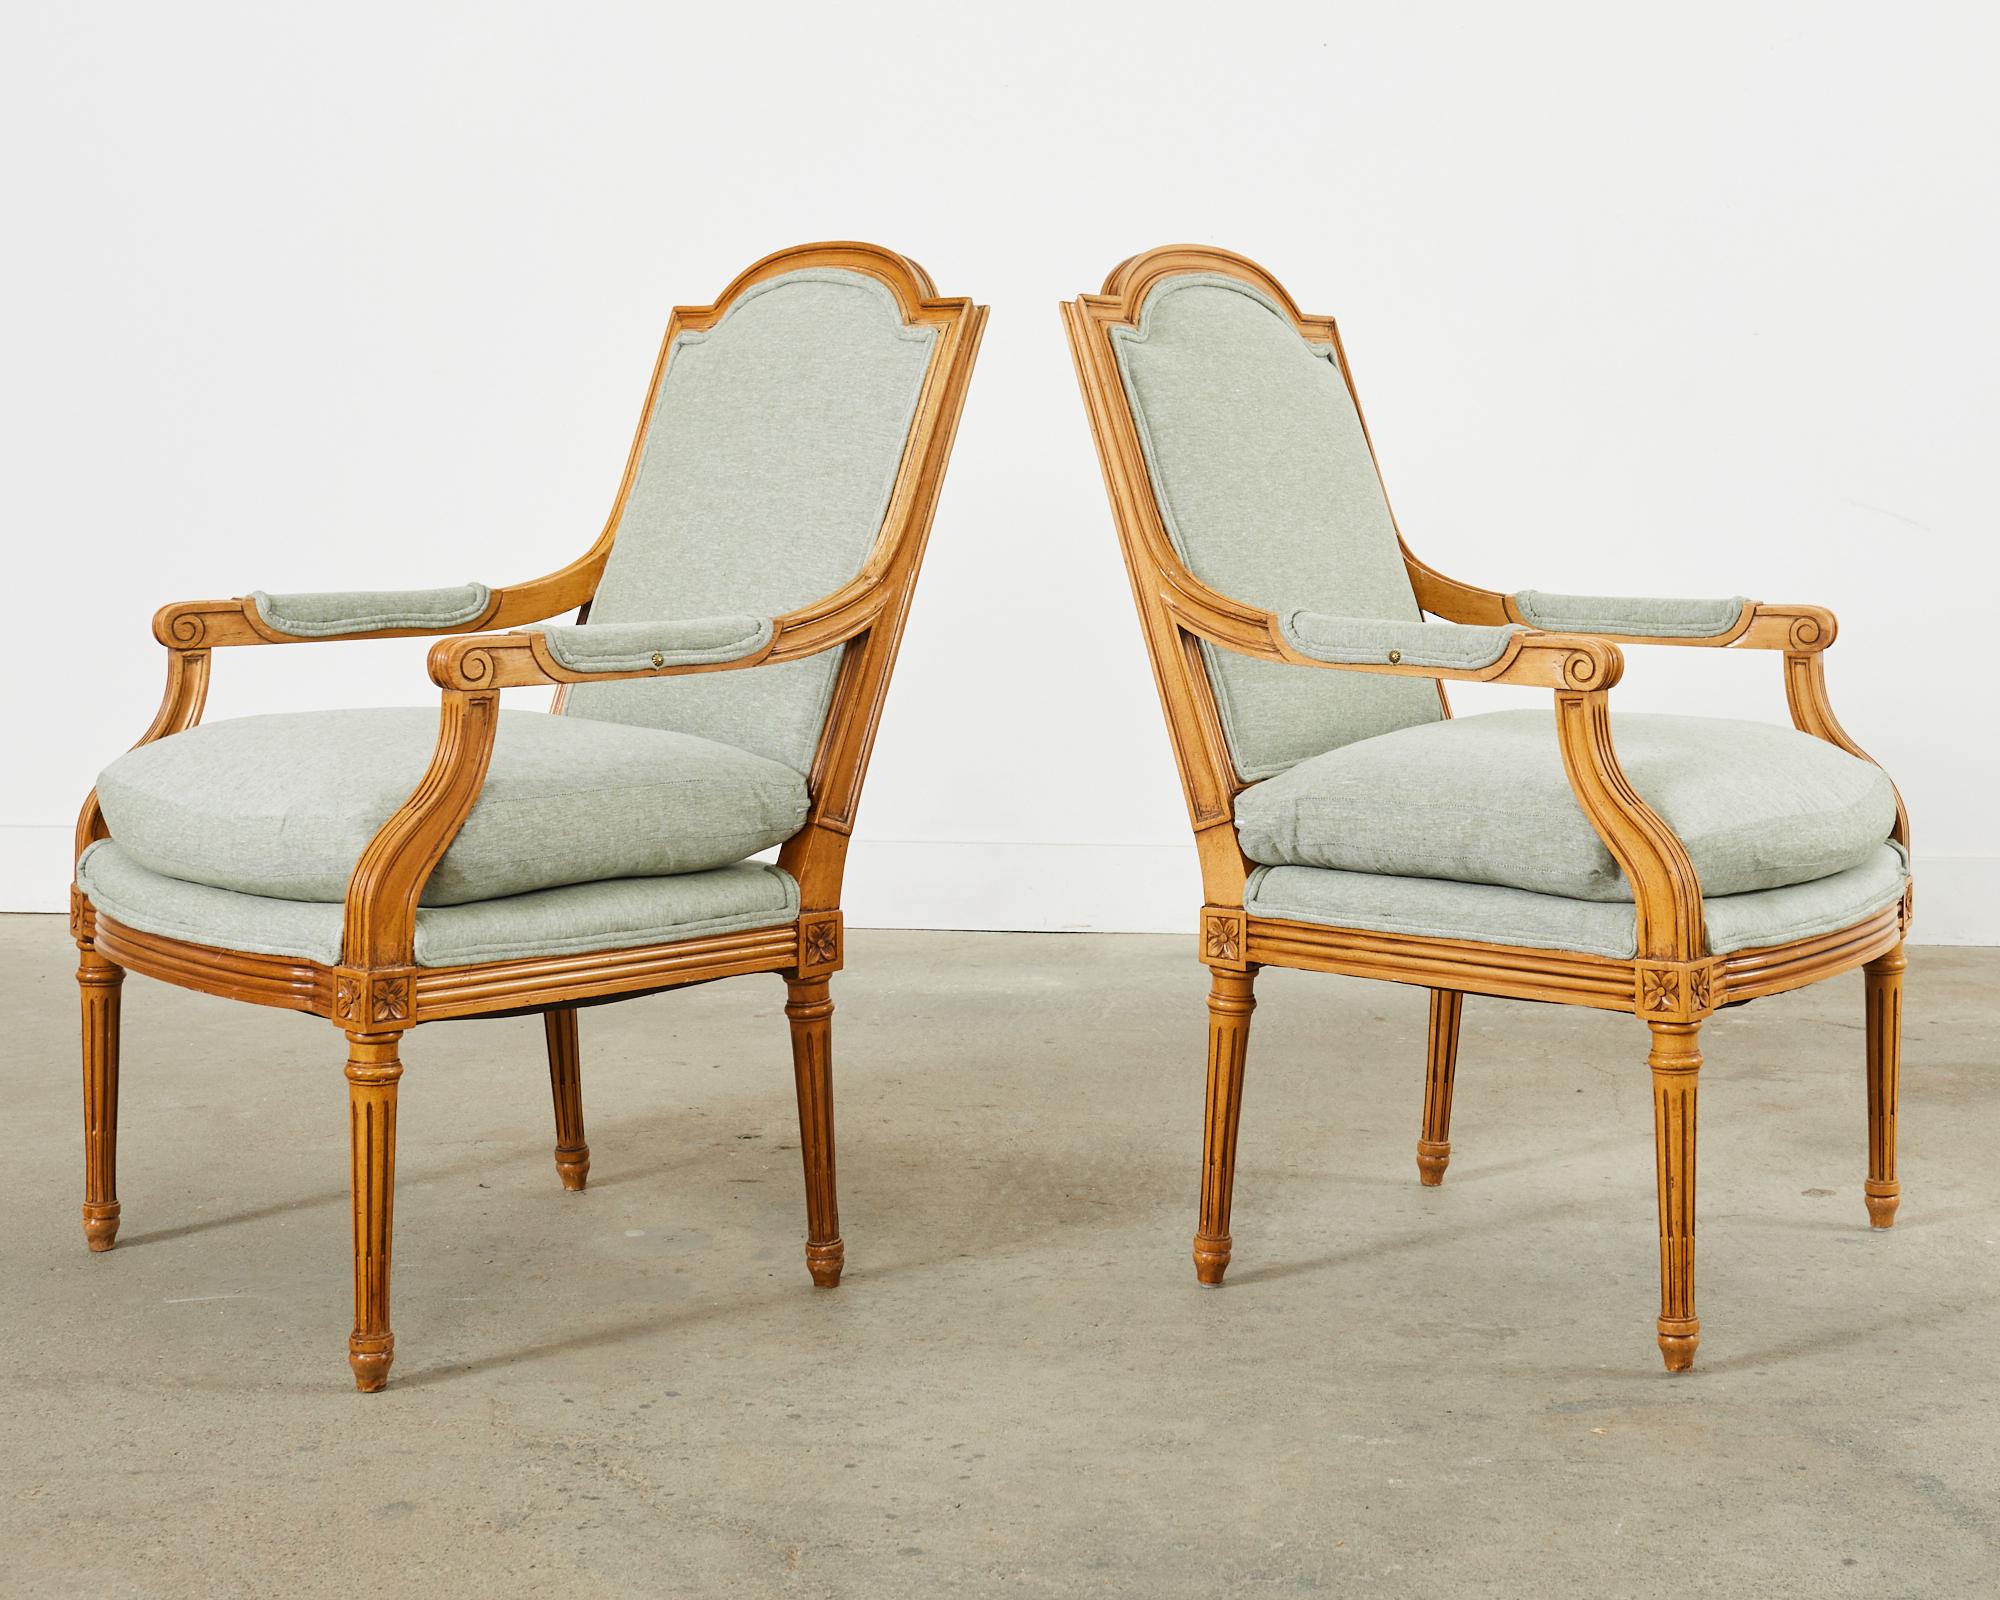 Pair of French Louis XVI Style Beechwood Fauteuil Armchairs  In Good Condition For Sale In Rio Vista, CA